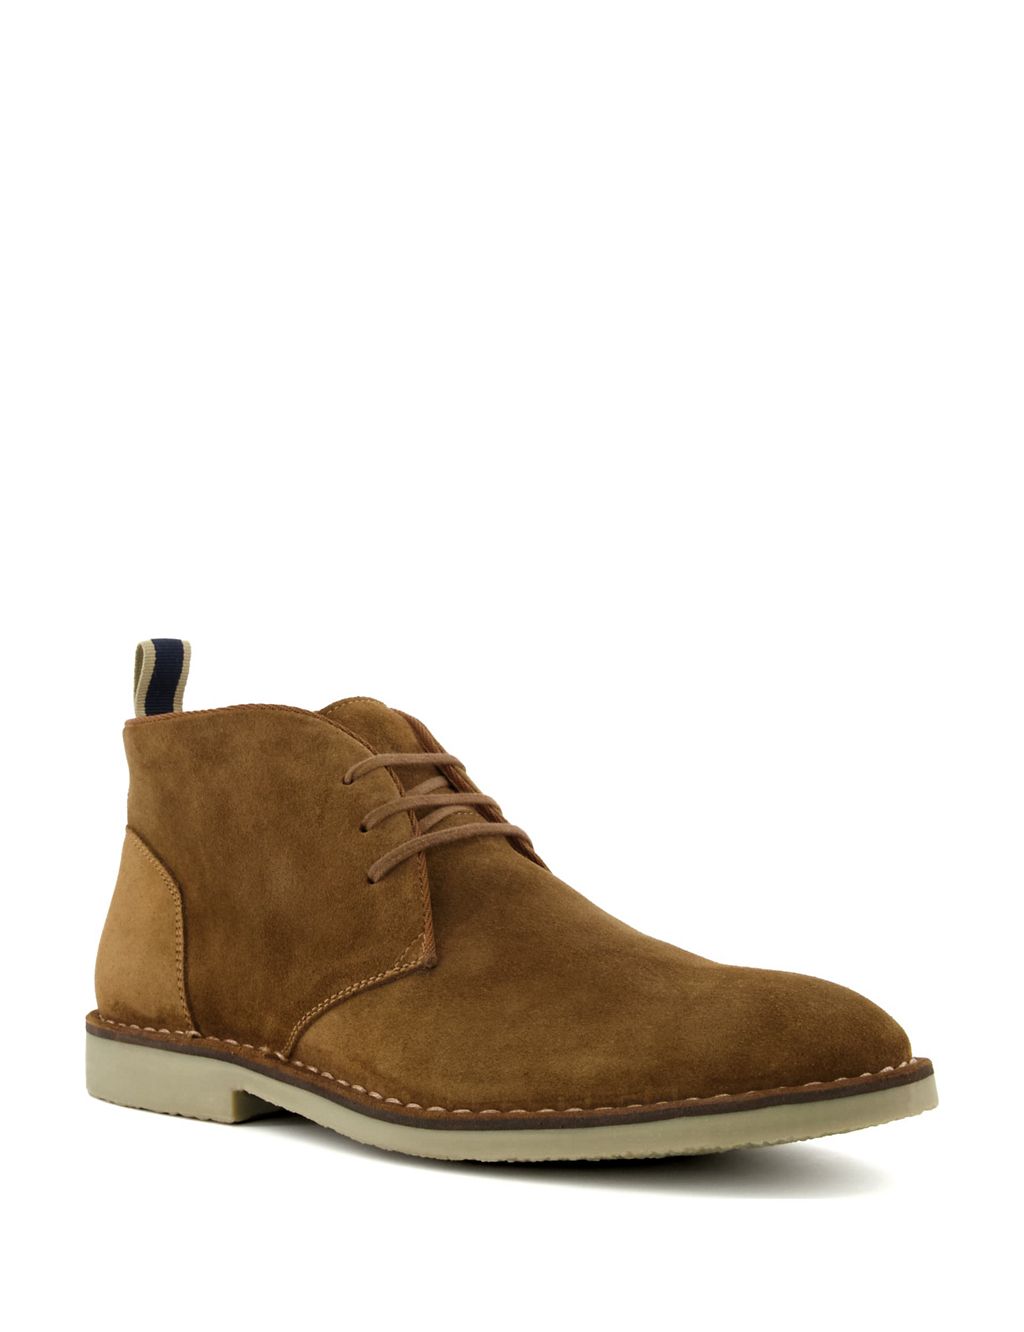 Cashed Chukka Boot 1 of 3